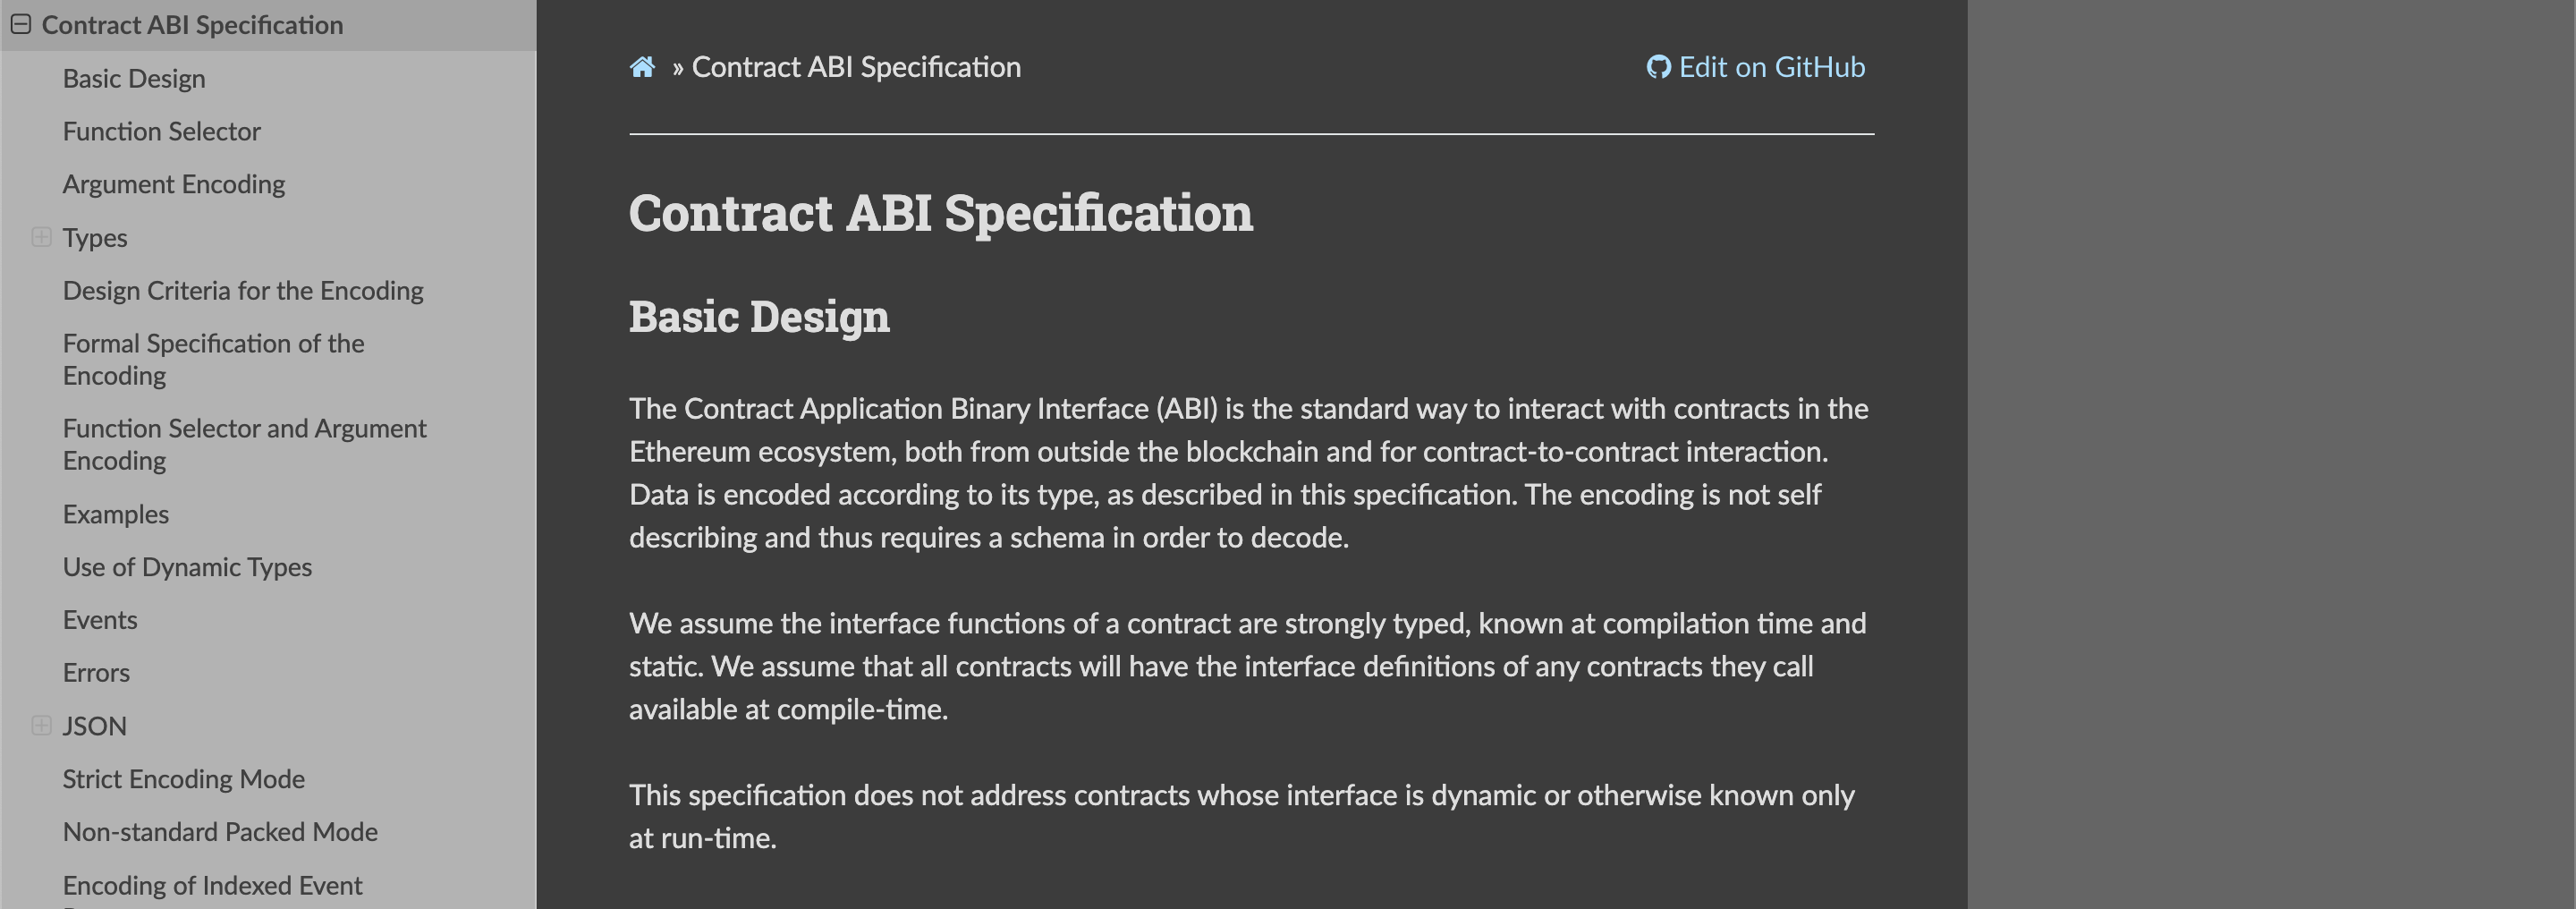 Contract ABI Specification